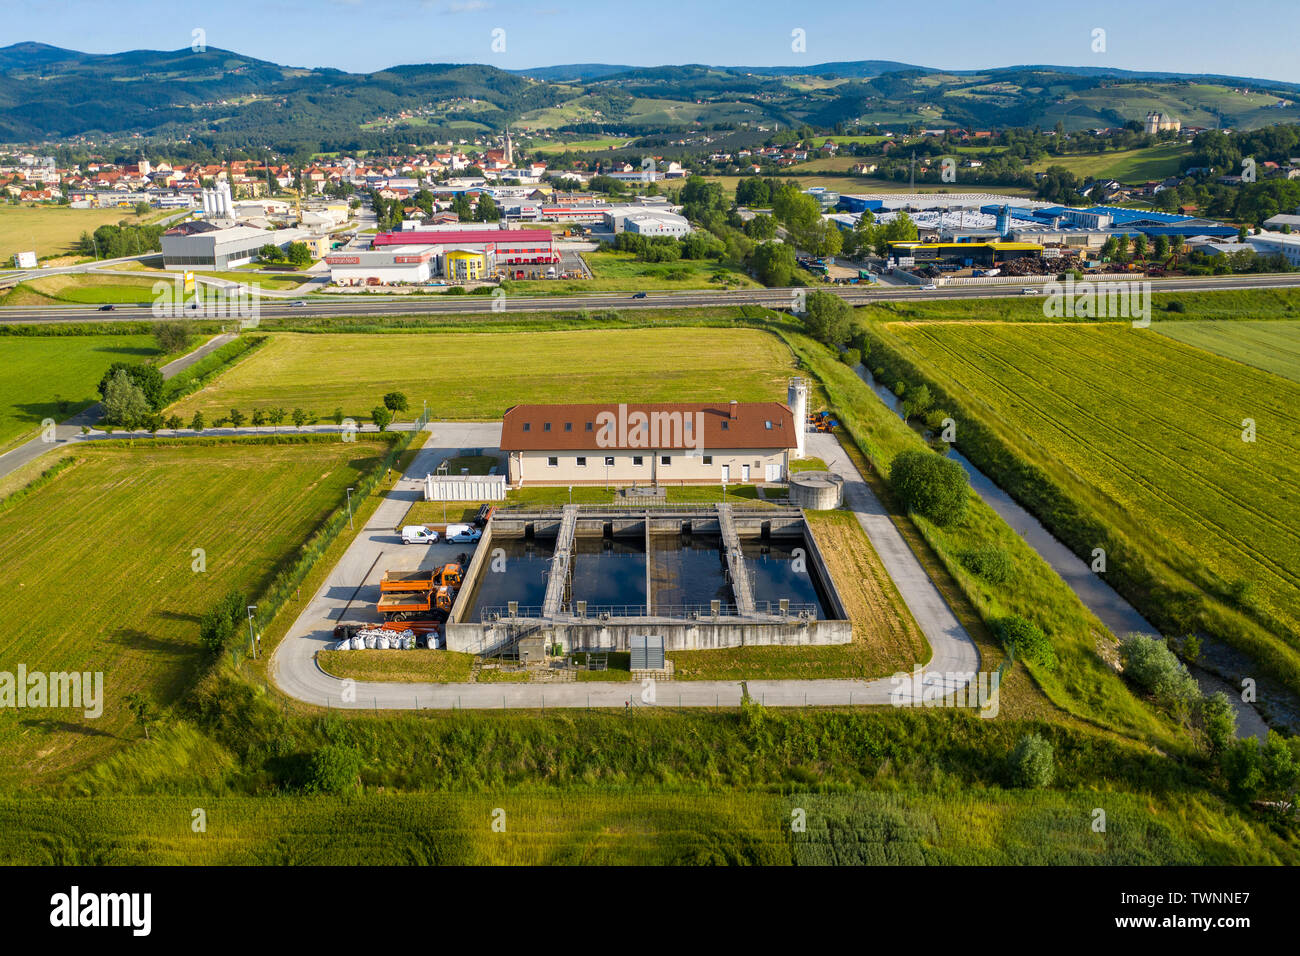 Slovenska Bistrica, Slovenia - June 9 2019: Aerial view of wastewater and sewage treatment plant in the outskirts of Slovenska Bistrica. Stock Photo